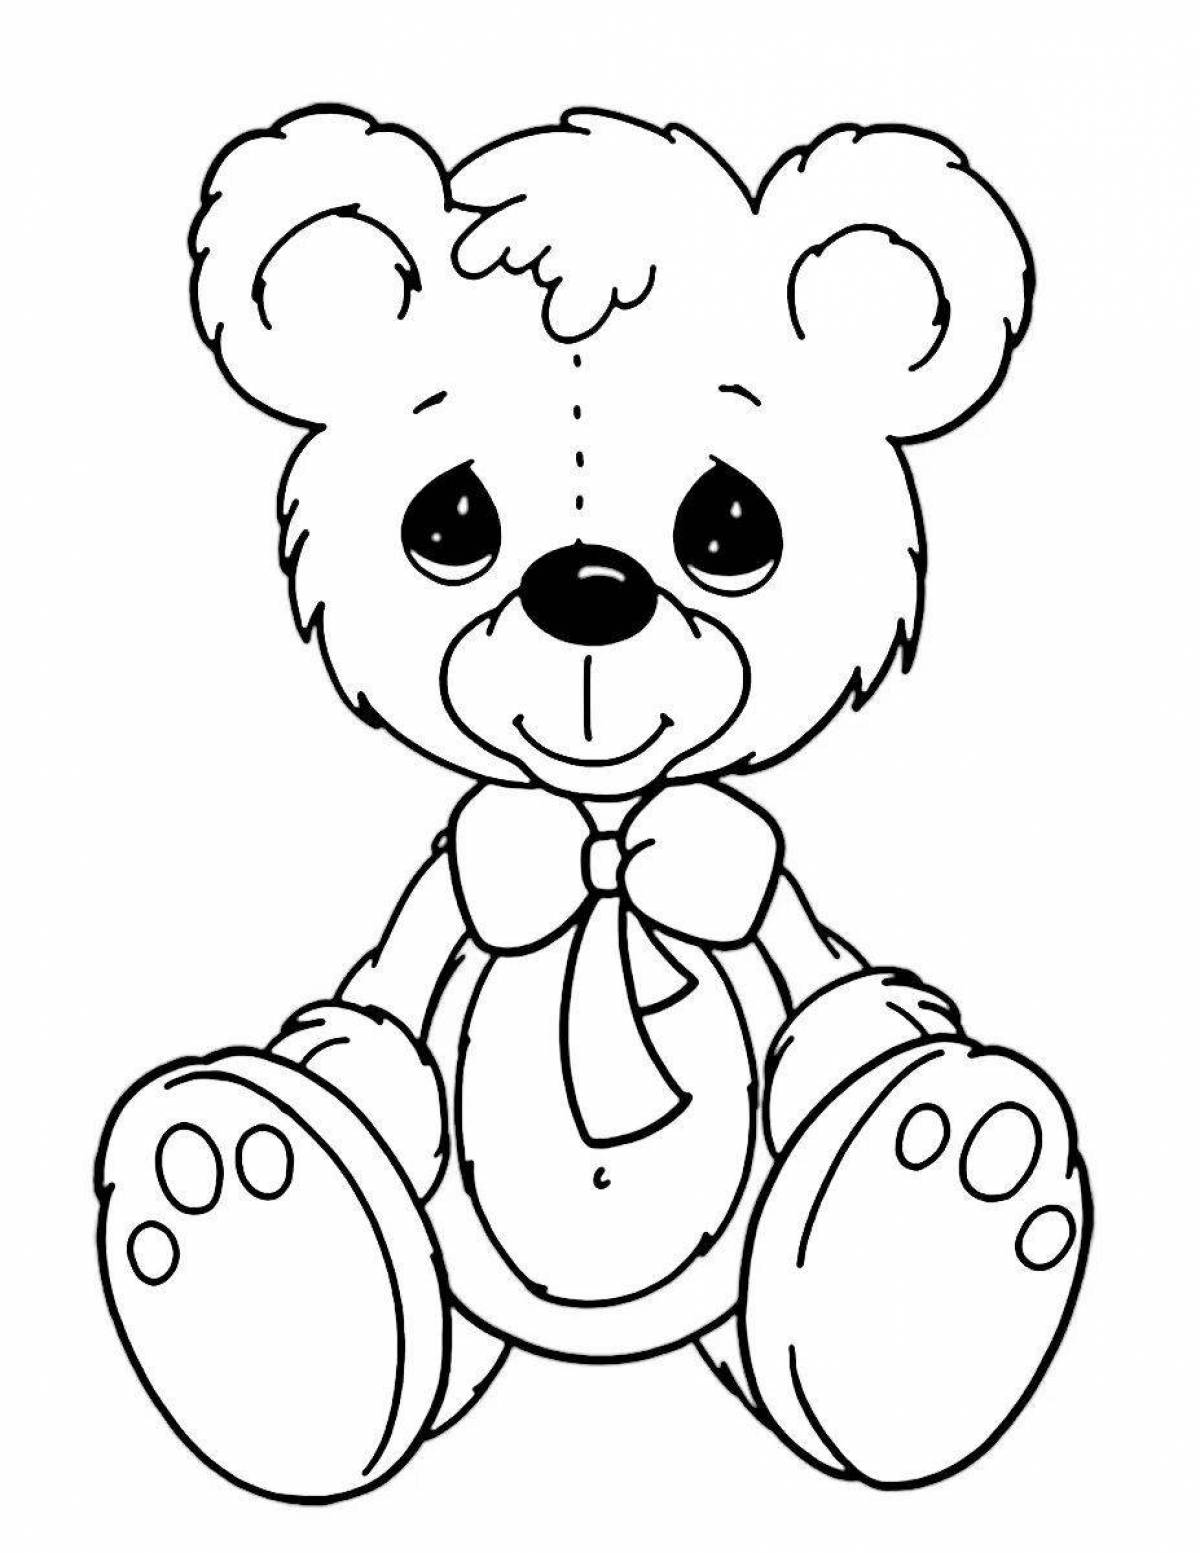 Spectacular coloring bear for children 5-6 years old